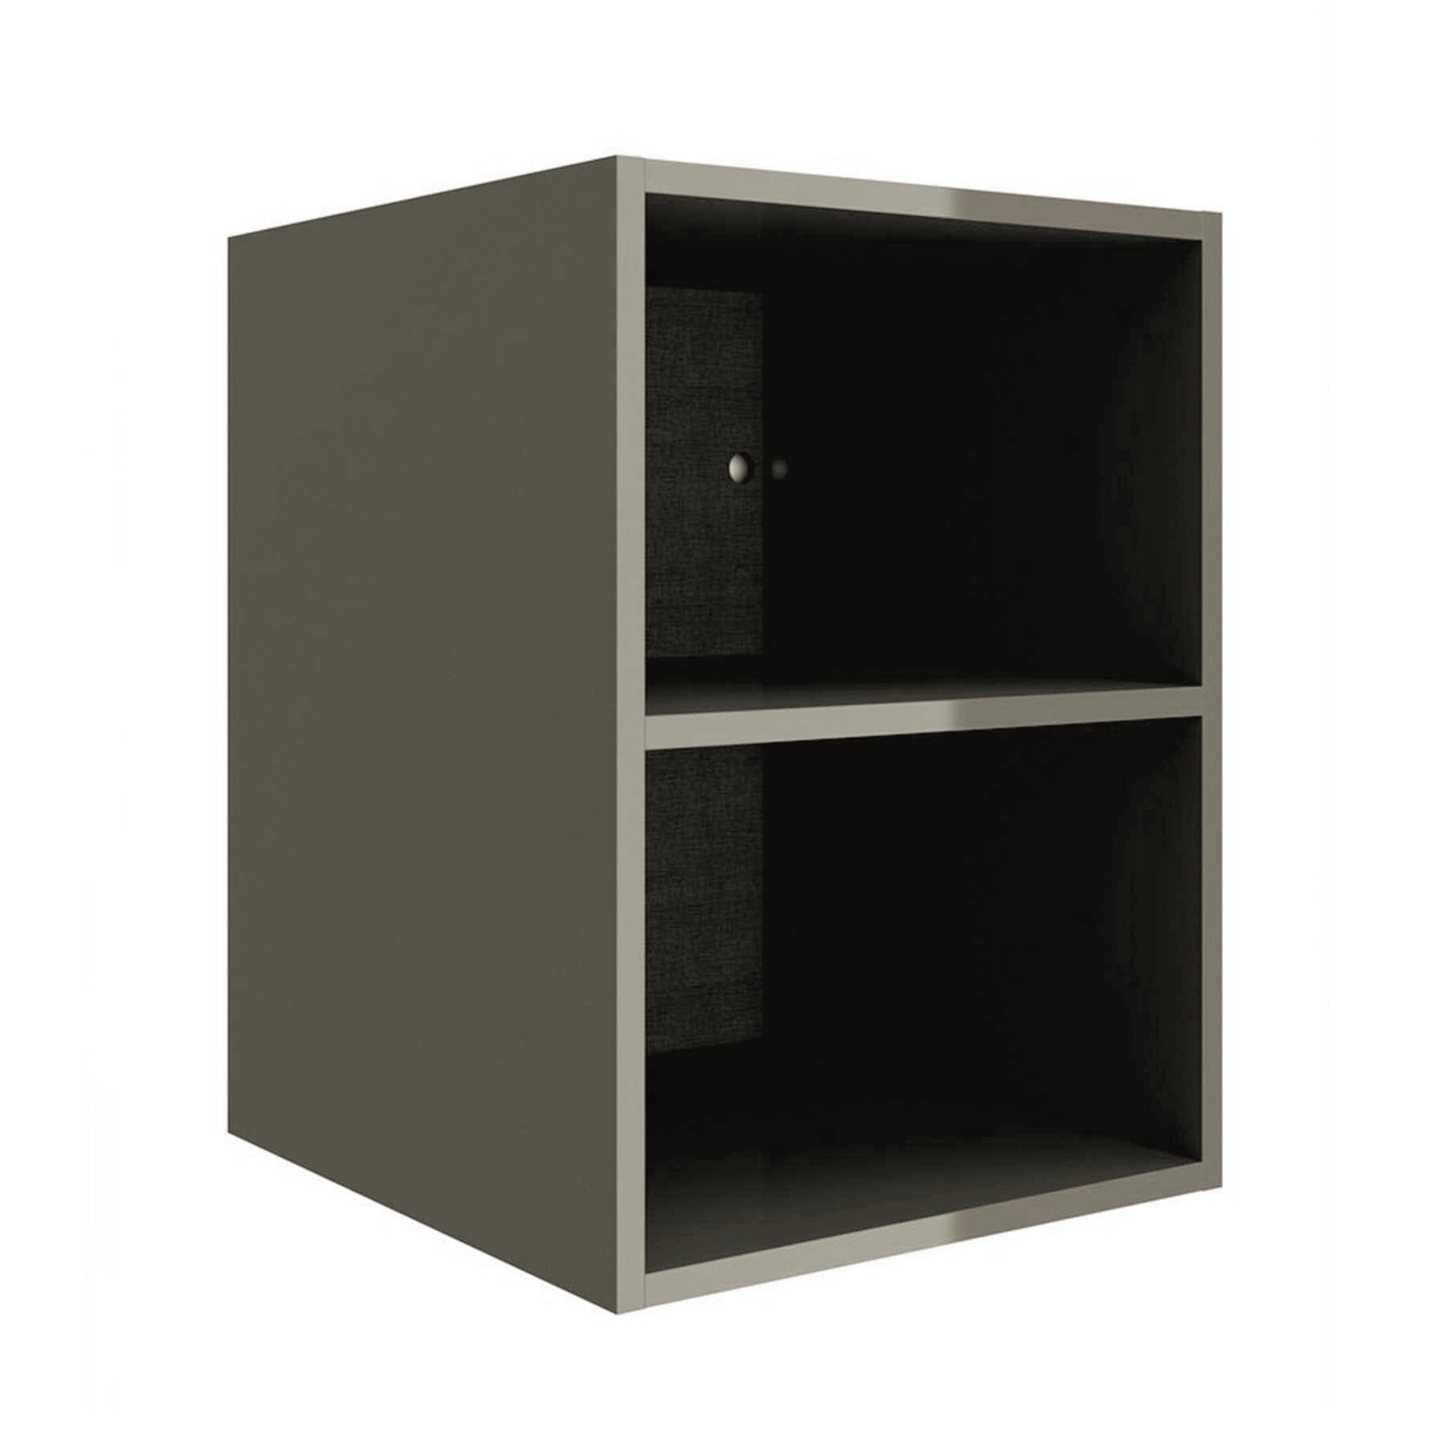 Wall-hung storage unit Alliance 16 inches (400) 2 spaces Taupe